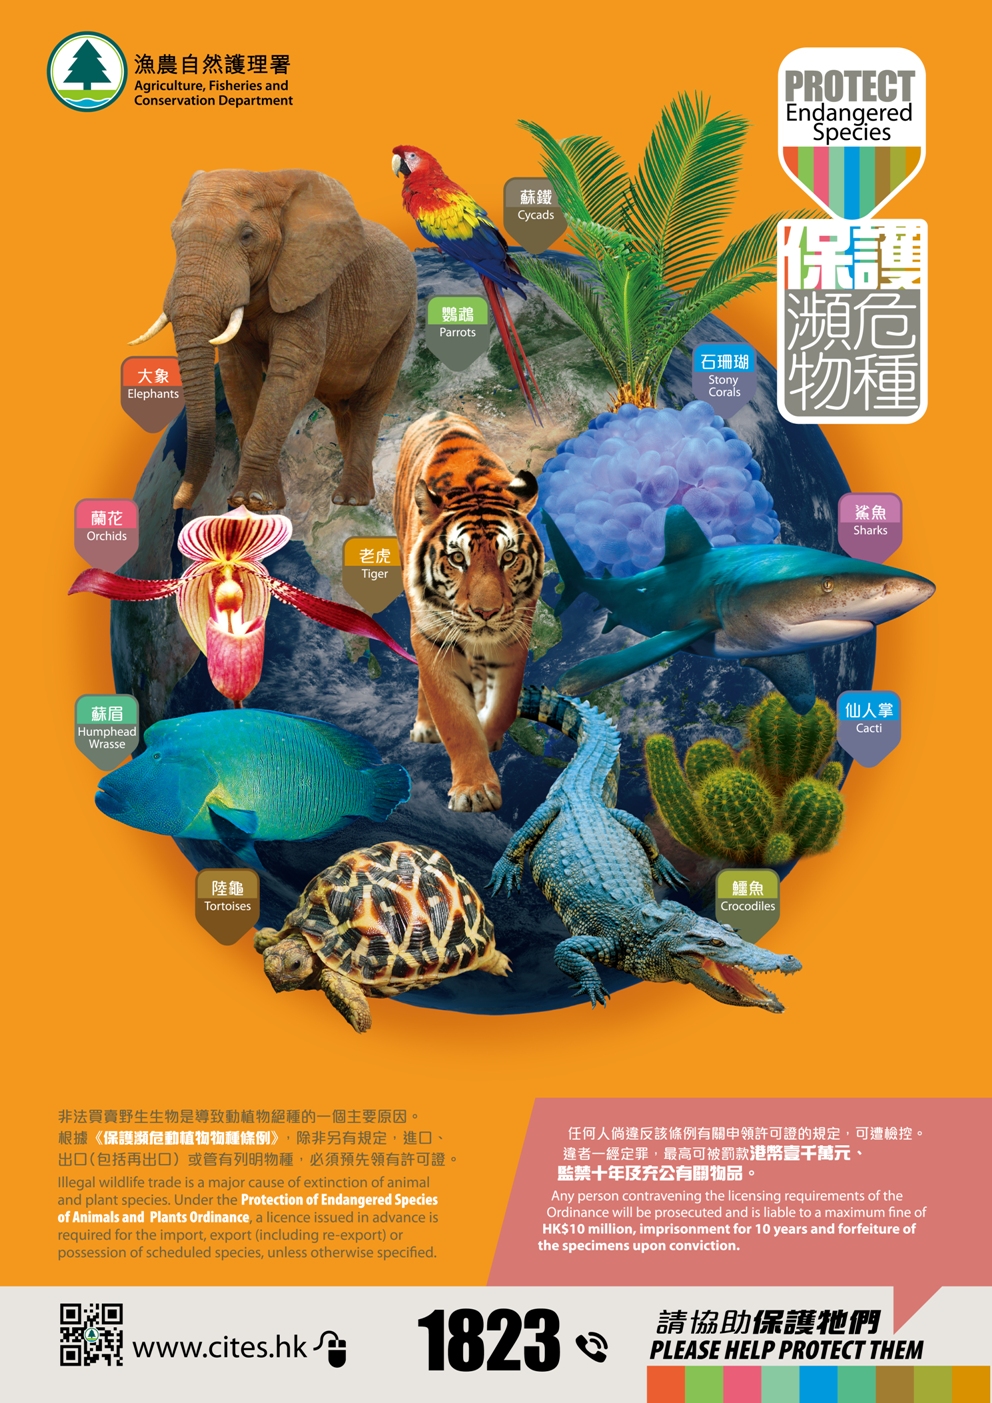 Agriculture, Fisheries and Conservation Department - Conservation - Endangered  Species Protection - Publicity Materials - Posters